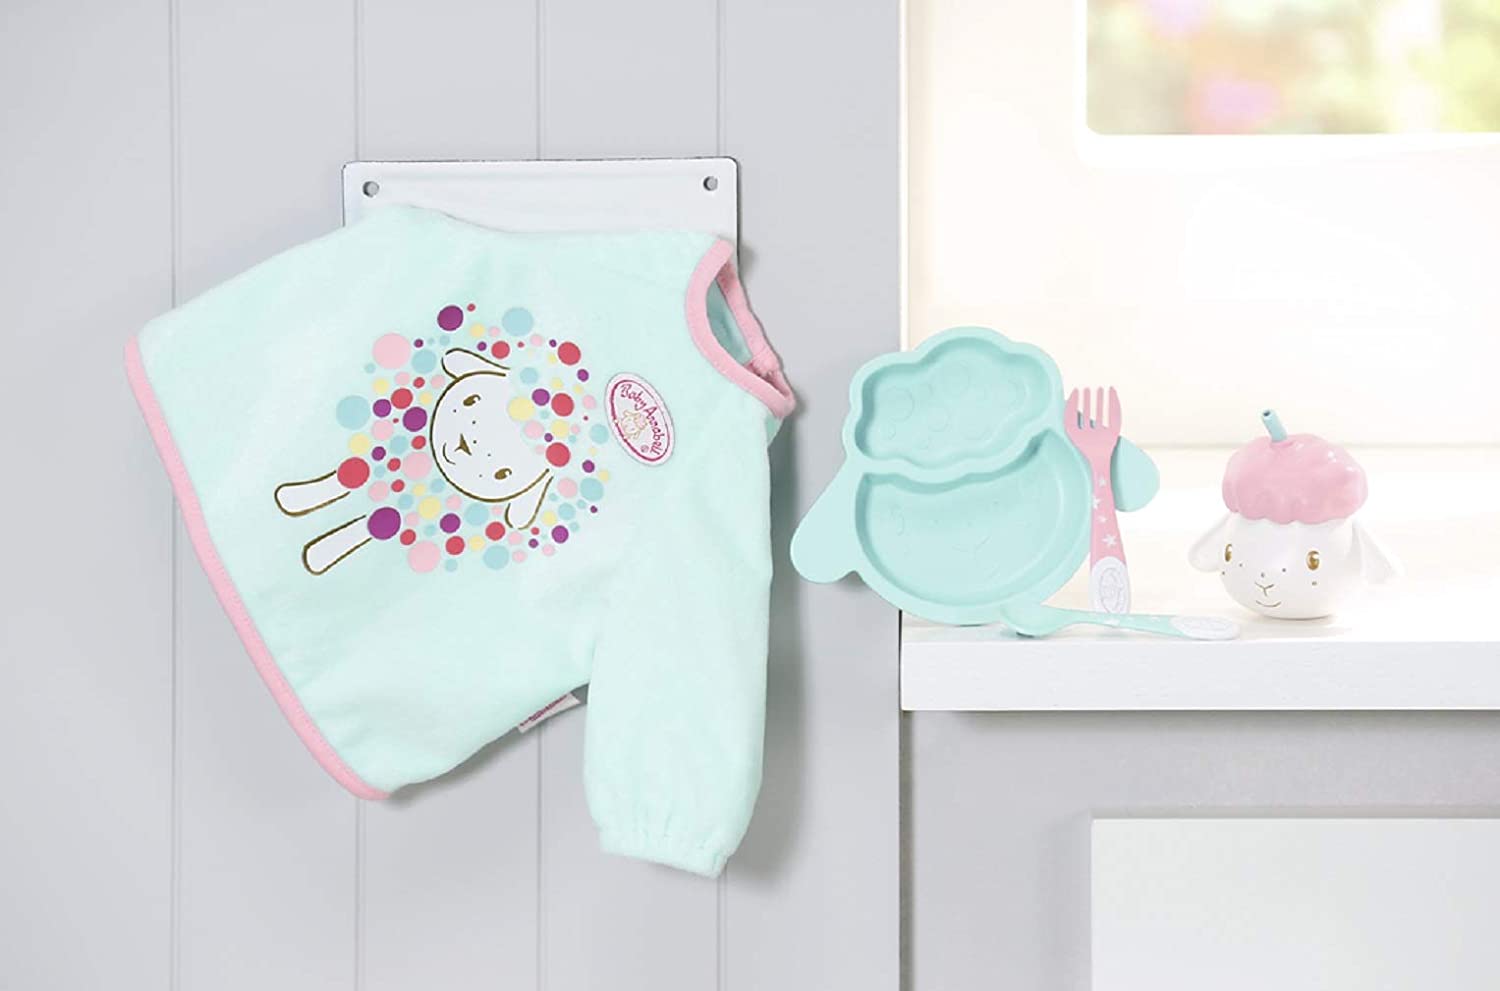 Baby Annabell Lunchtime Set